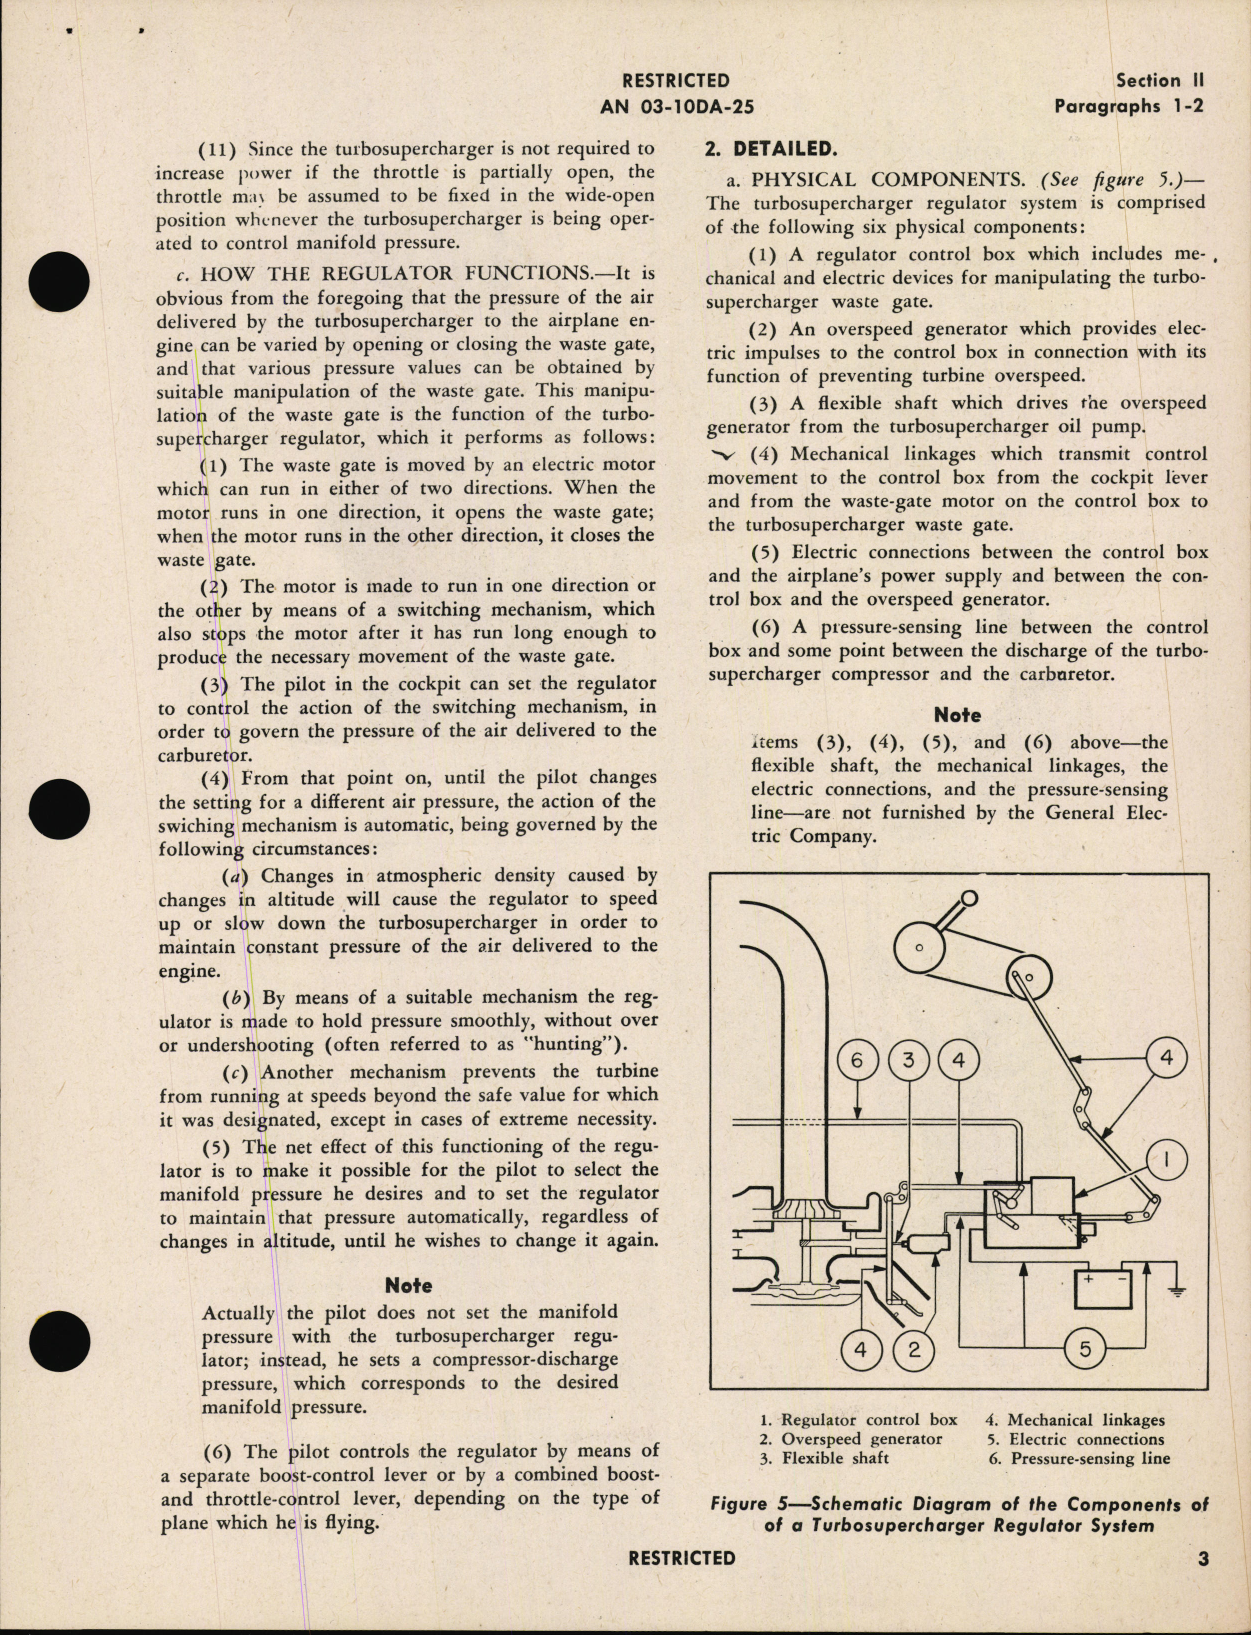 Sample page 7 from AirCorps Library document: Handbook of Instructions with Parts Catalog for Type C-2A Electric Regulator Turbosupercharger Model 3GPR7B1